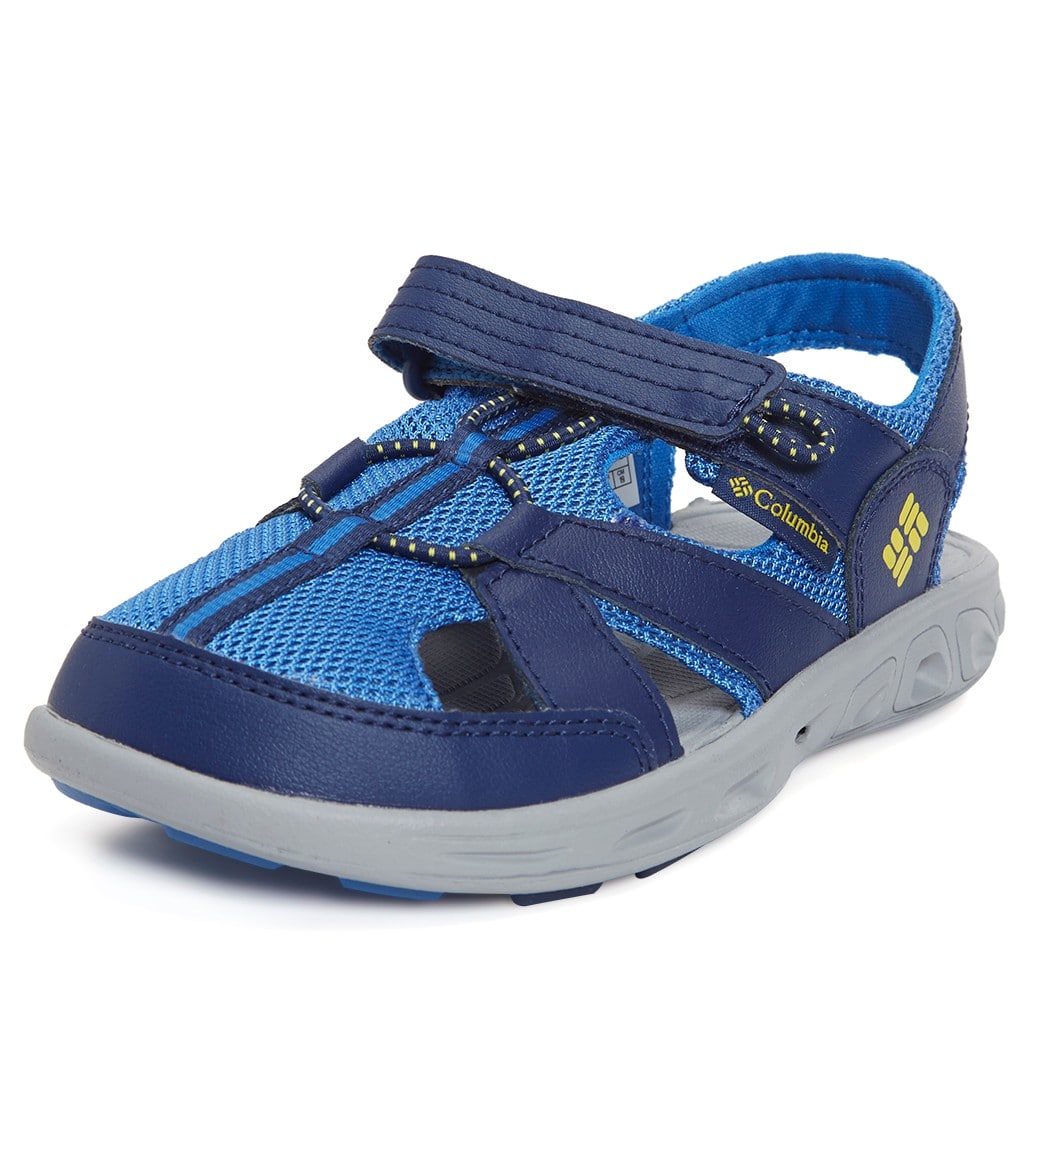 Columbia Youth Techsun Wave Water Shoe - Blue 2 - Swimoutlet.com